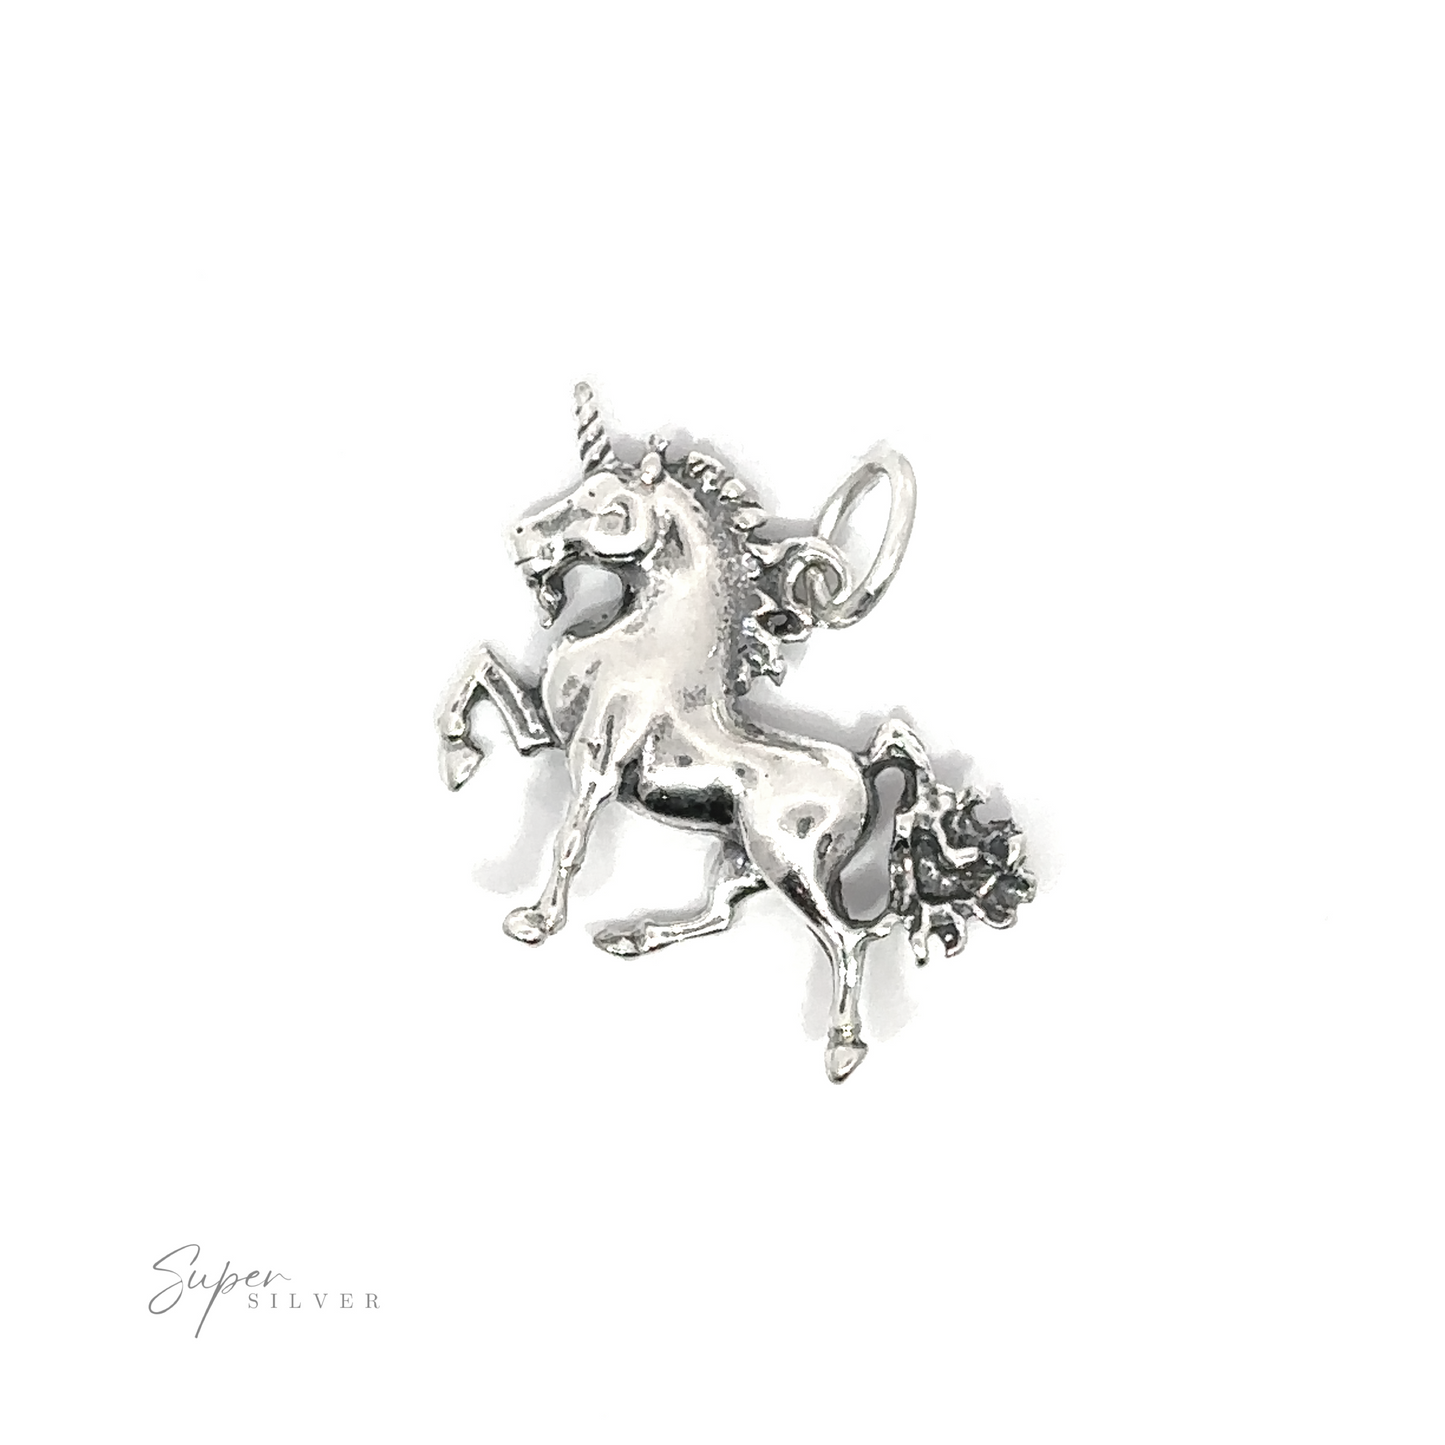 A .925 Sterling Silver Unicorn Charm with detailed hair on a white background.